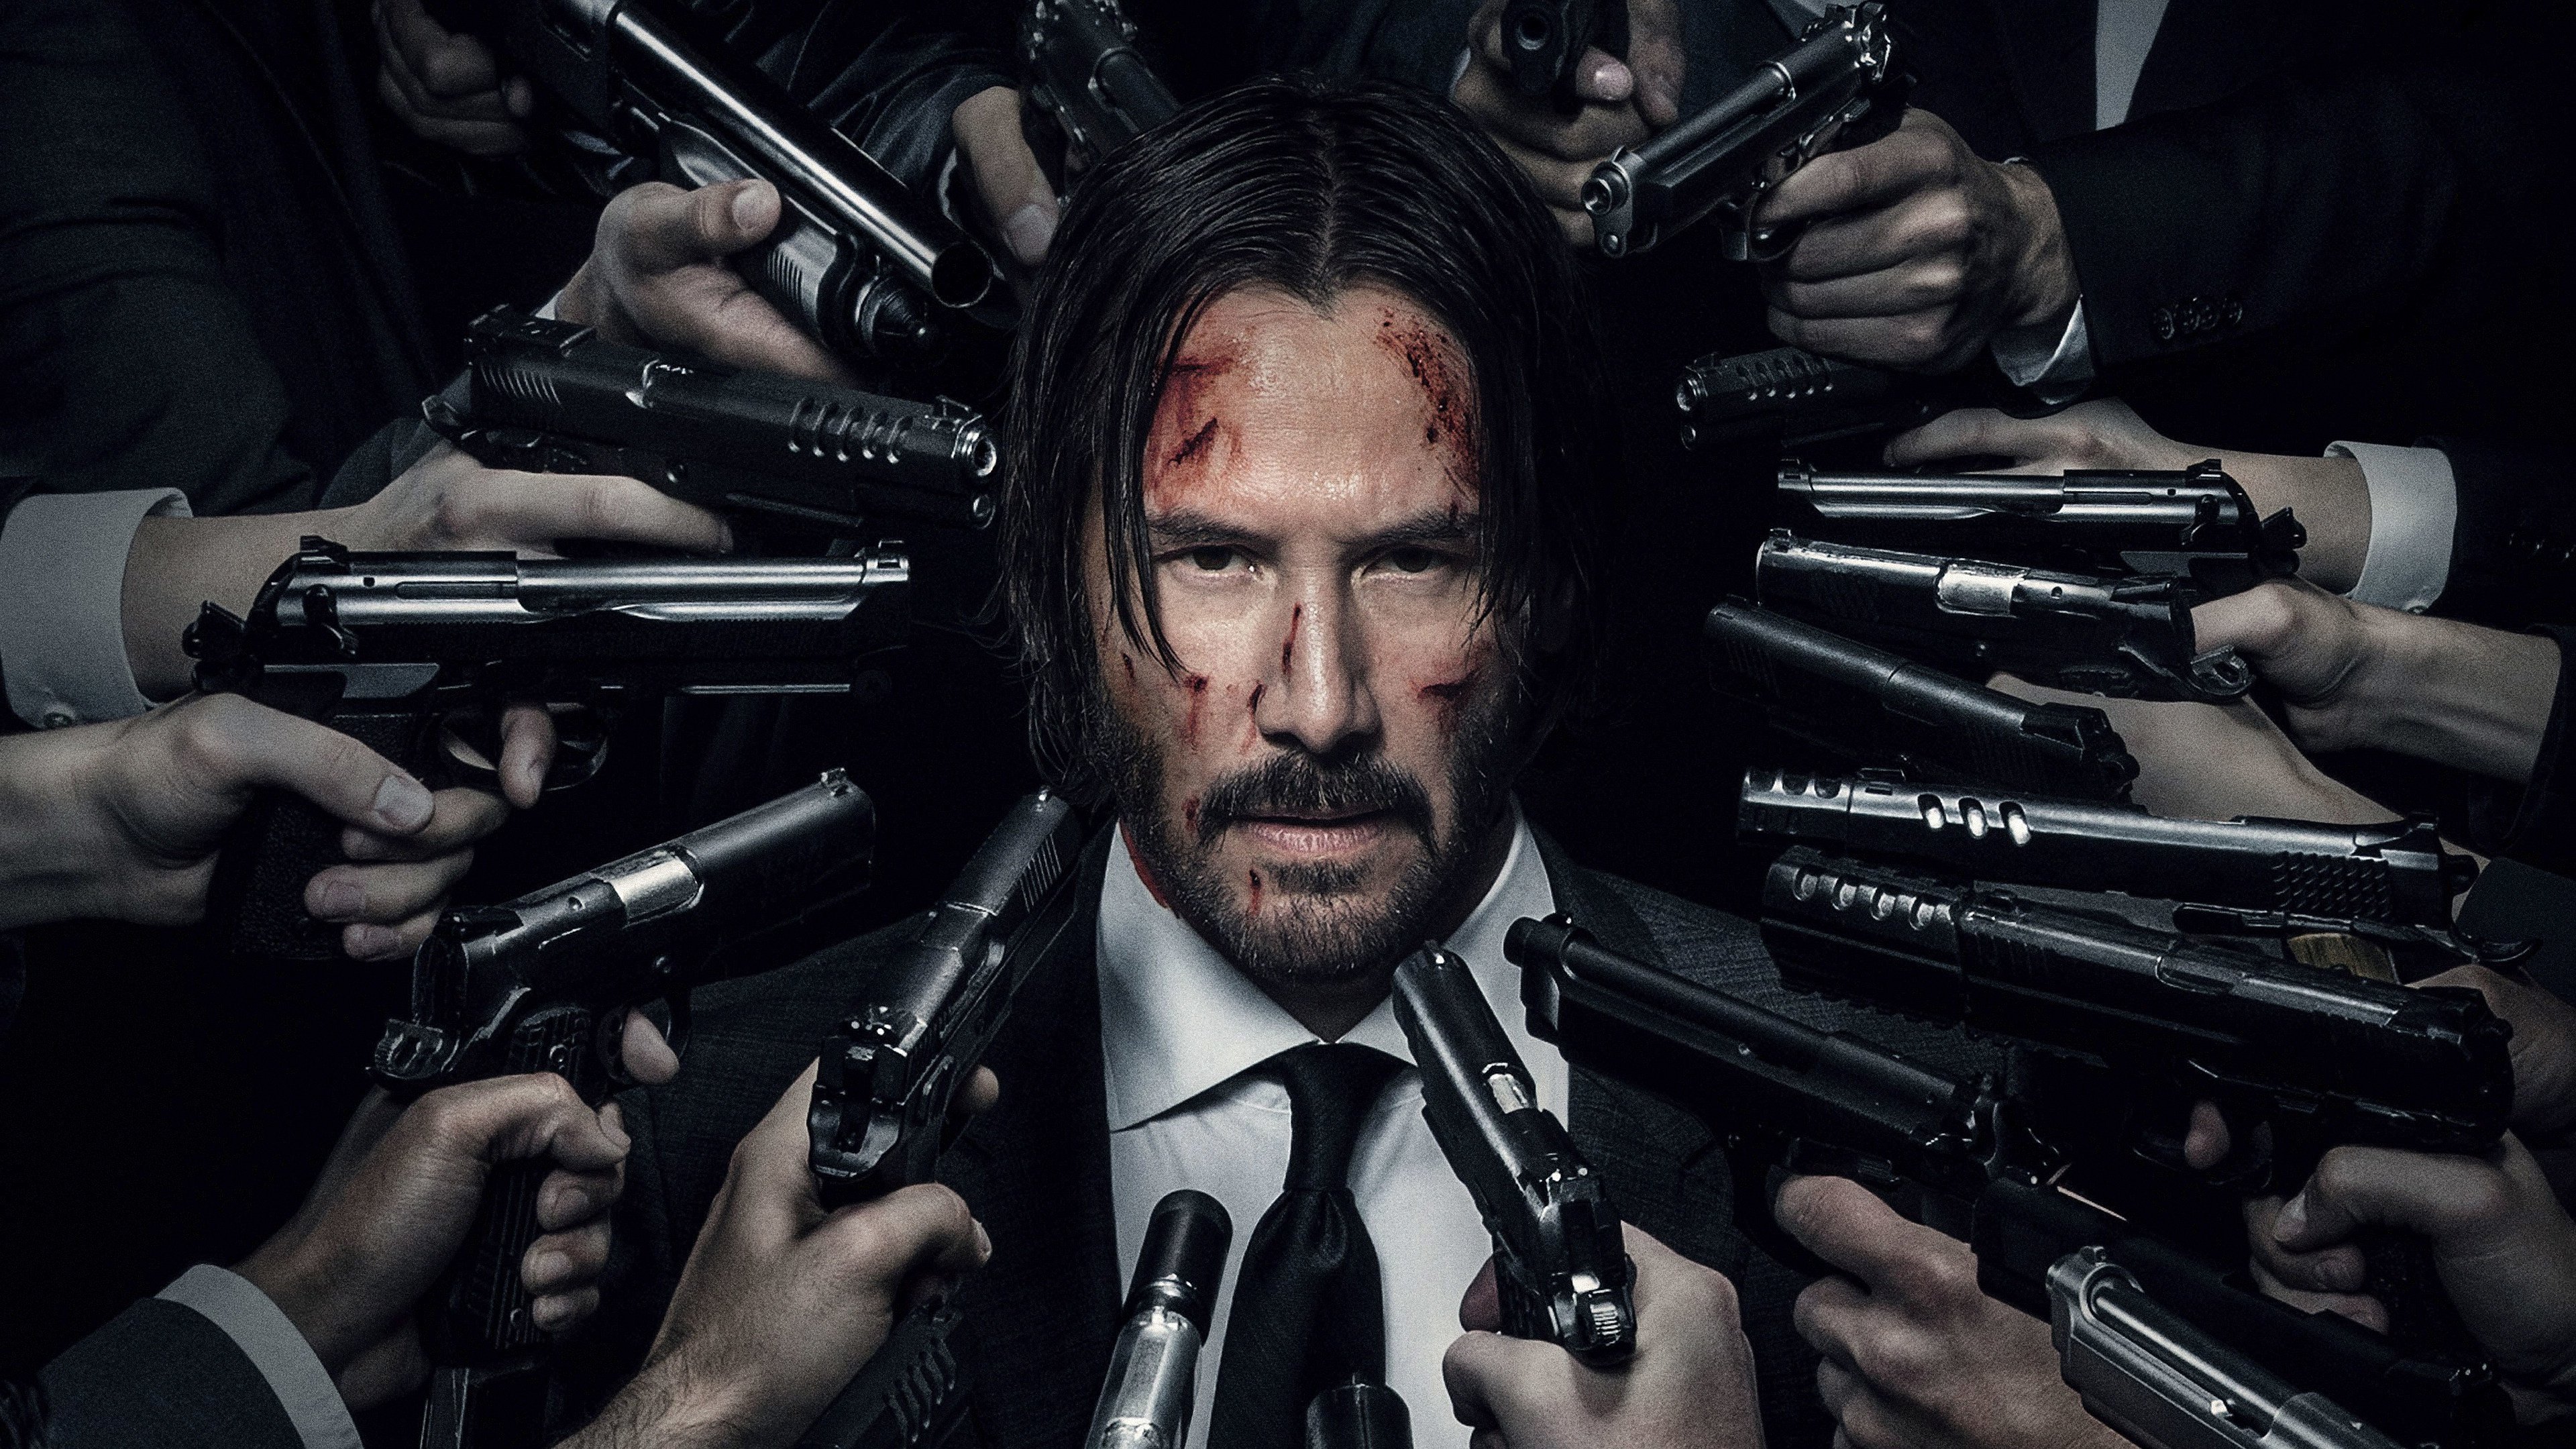 who was the band that played in john wick 2 movie